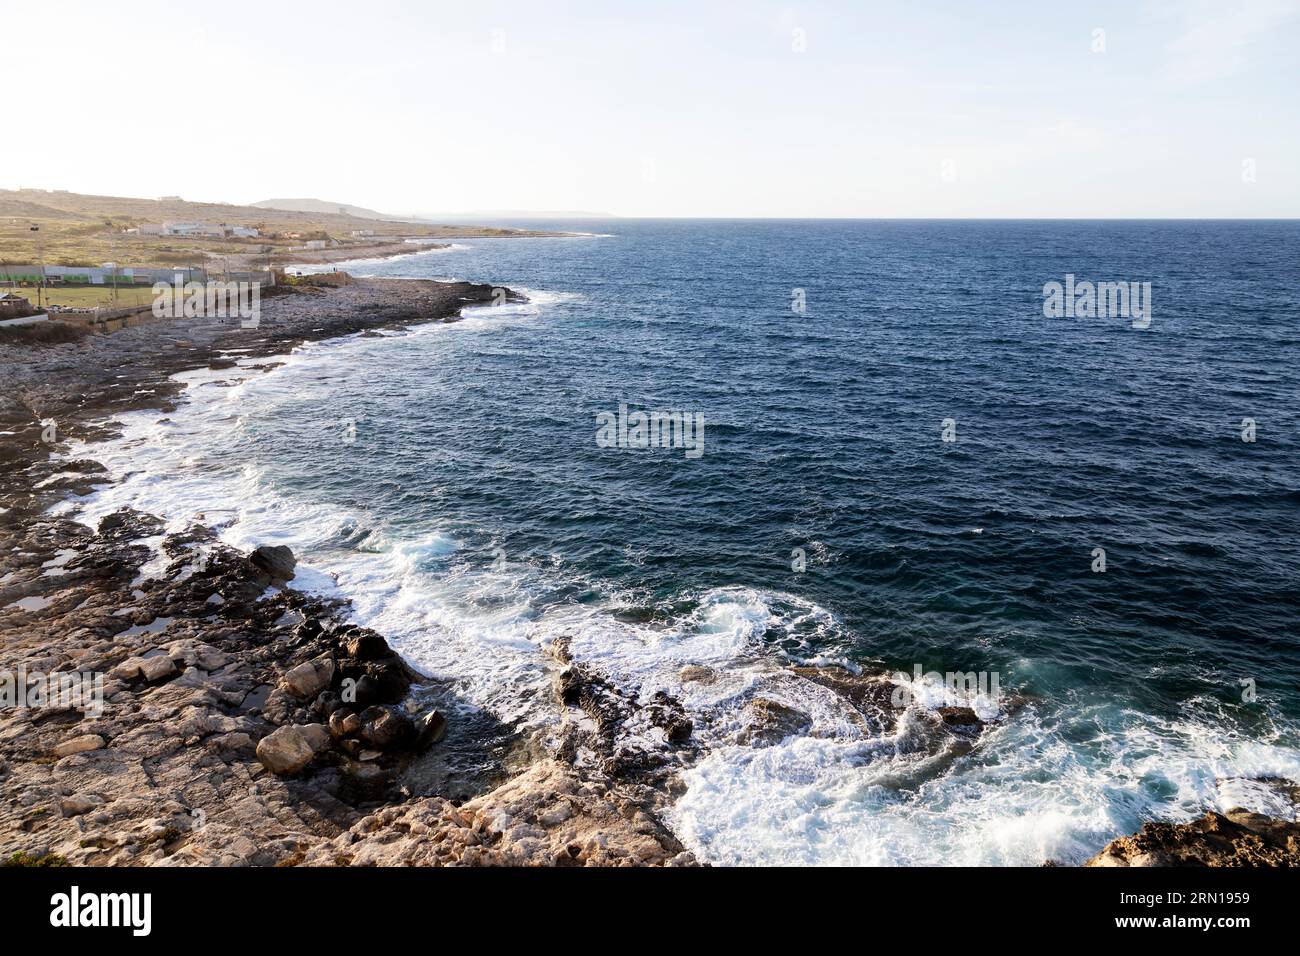 Morning at St Julian's in Malta. The Mediterranean Sea laps against the rocky coastline near Pembroke Atletha FC's soccer pitch. Stock Photo